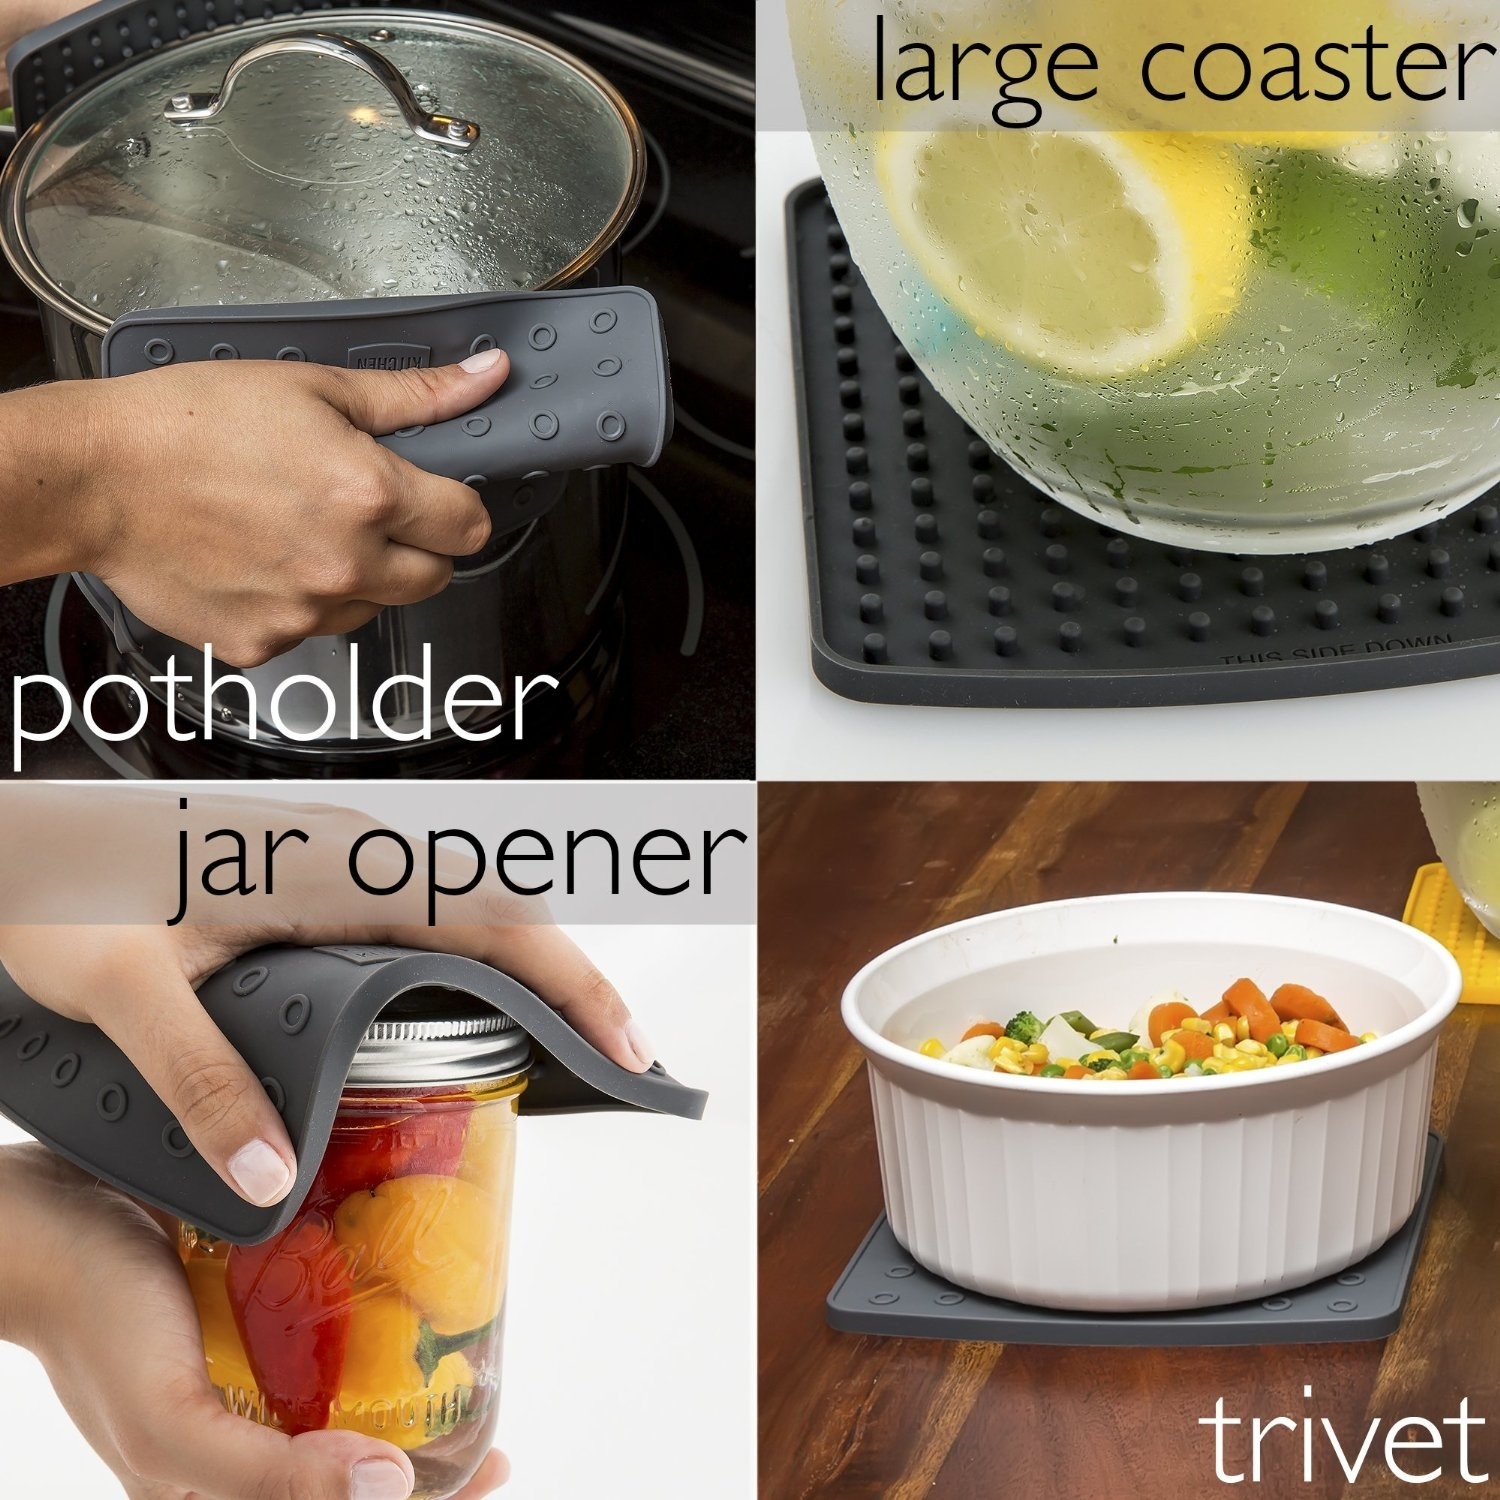 The square-shaped silicone potholder shown being used to grasp a pot of boiling water, as a coaster for a pitcher, a jar open, and a trivet for a hot dish. One side has ridges for additional grip